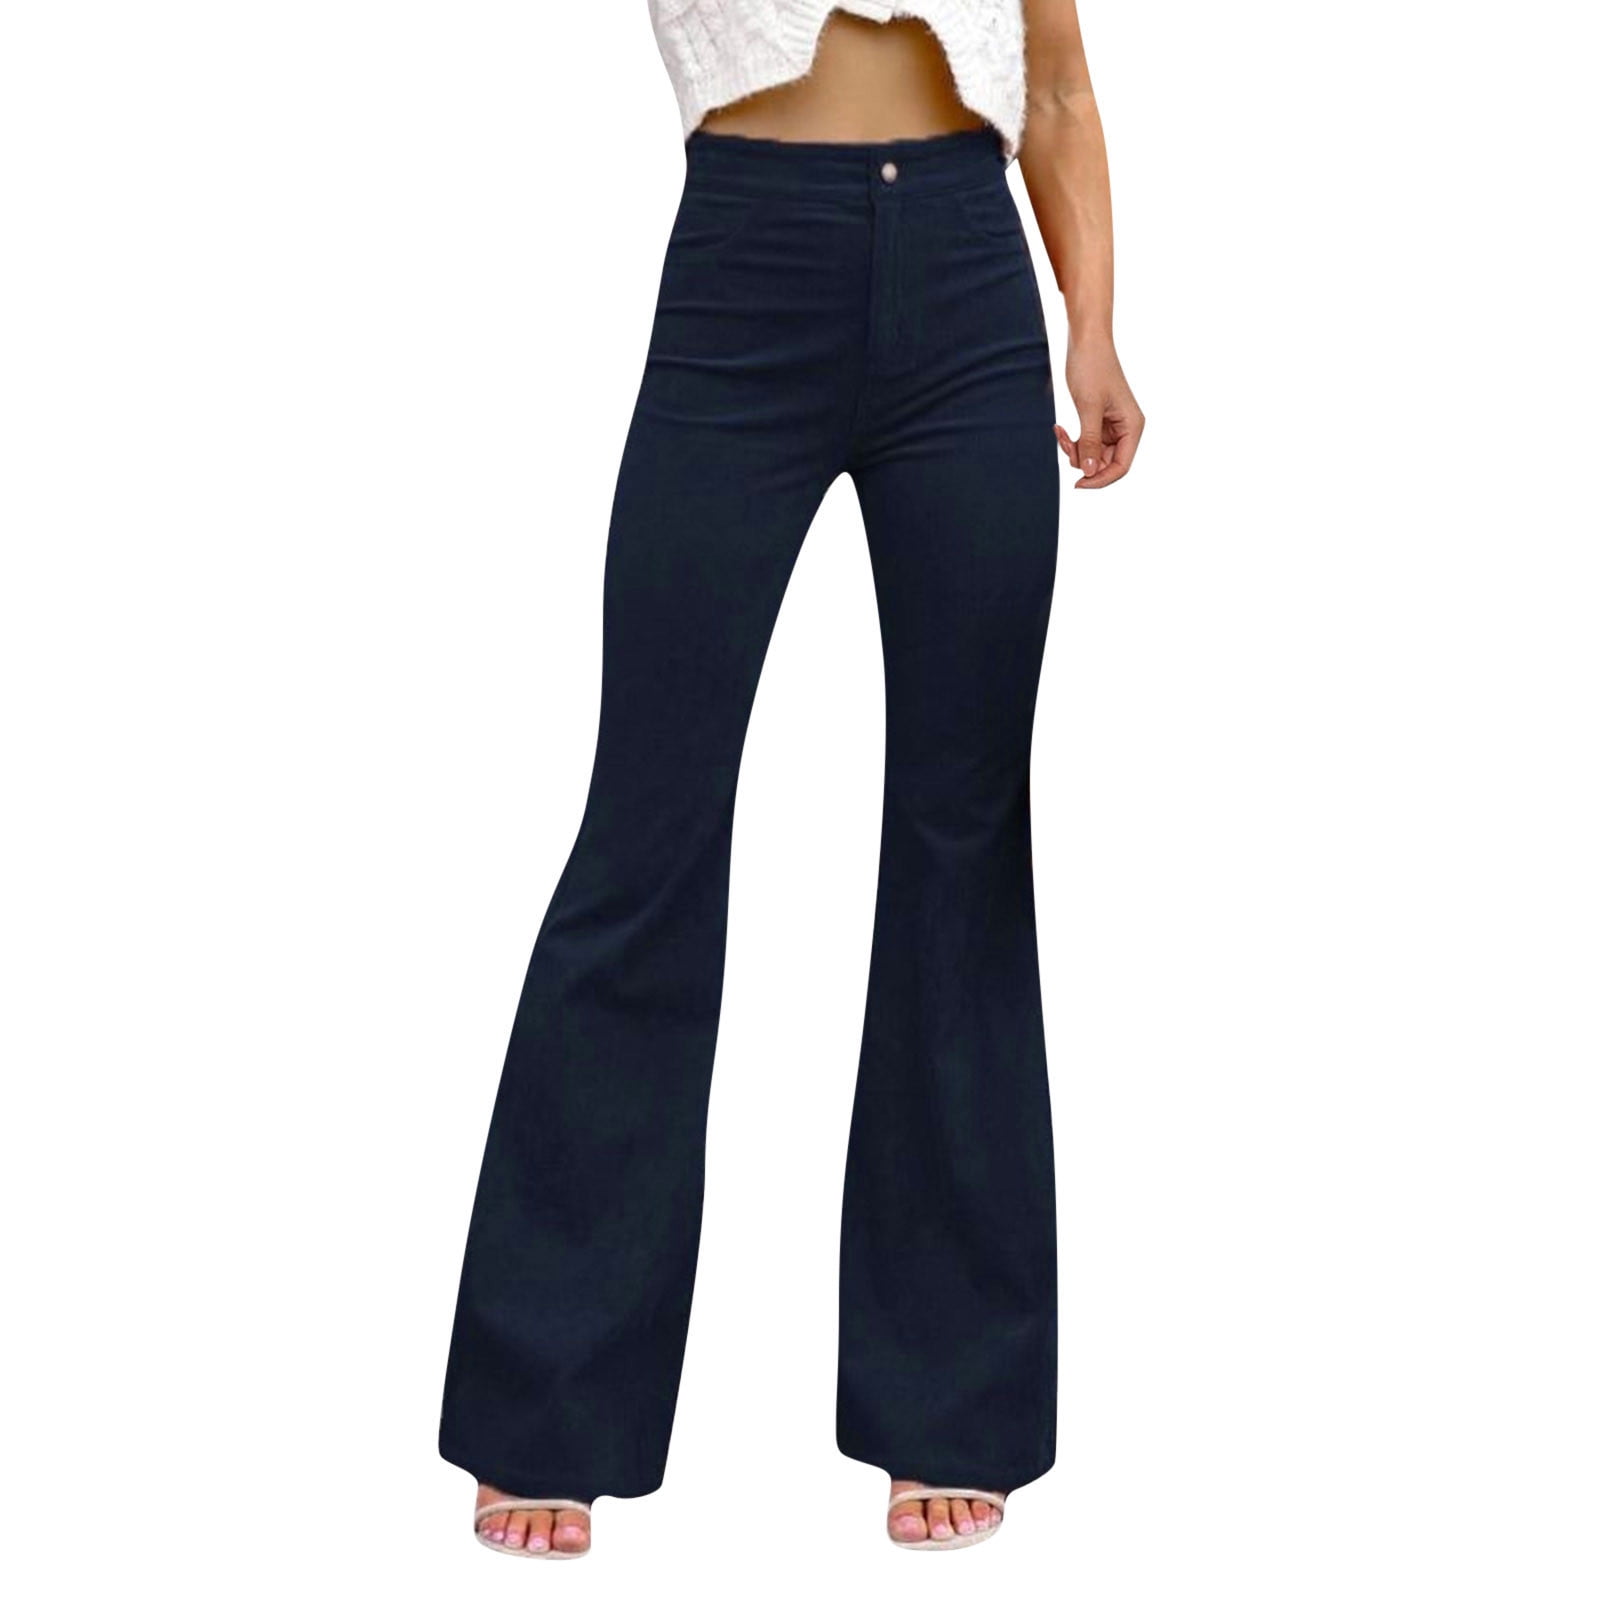 Hard Tail Low Rise Bellbottoms